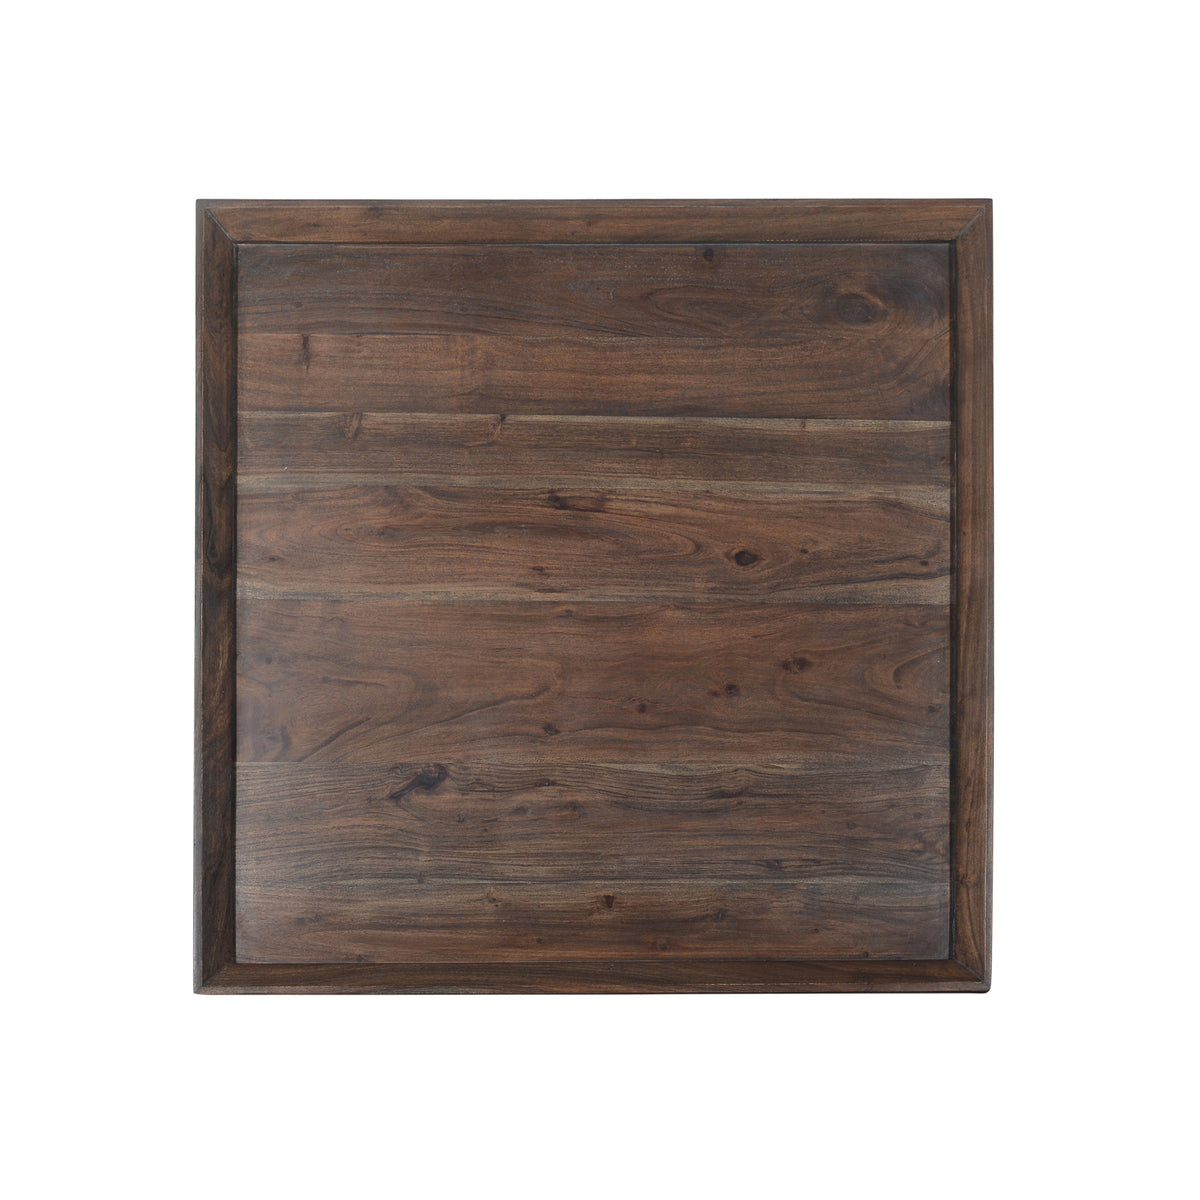 36 Inch Square Shape Acacia Wood Coffee Table with Trapezoid Base, Brown - UPT-204781